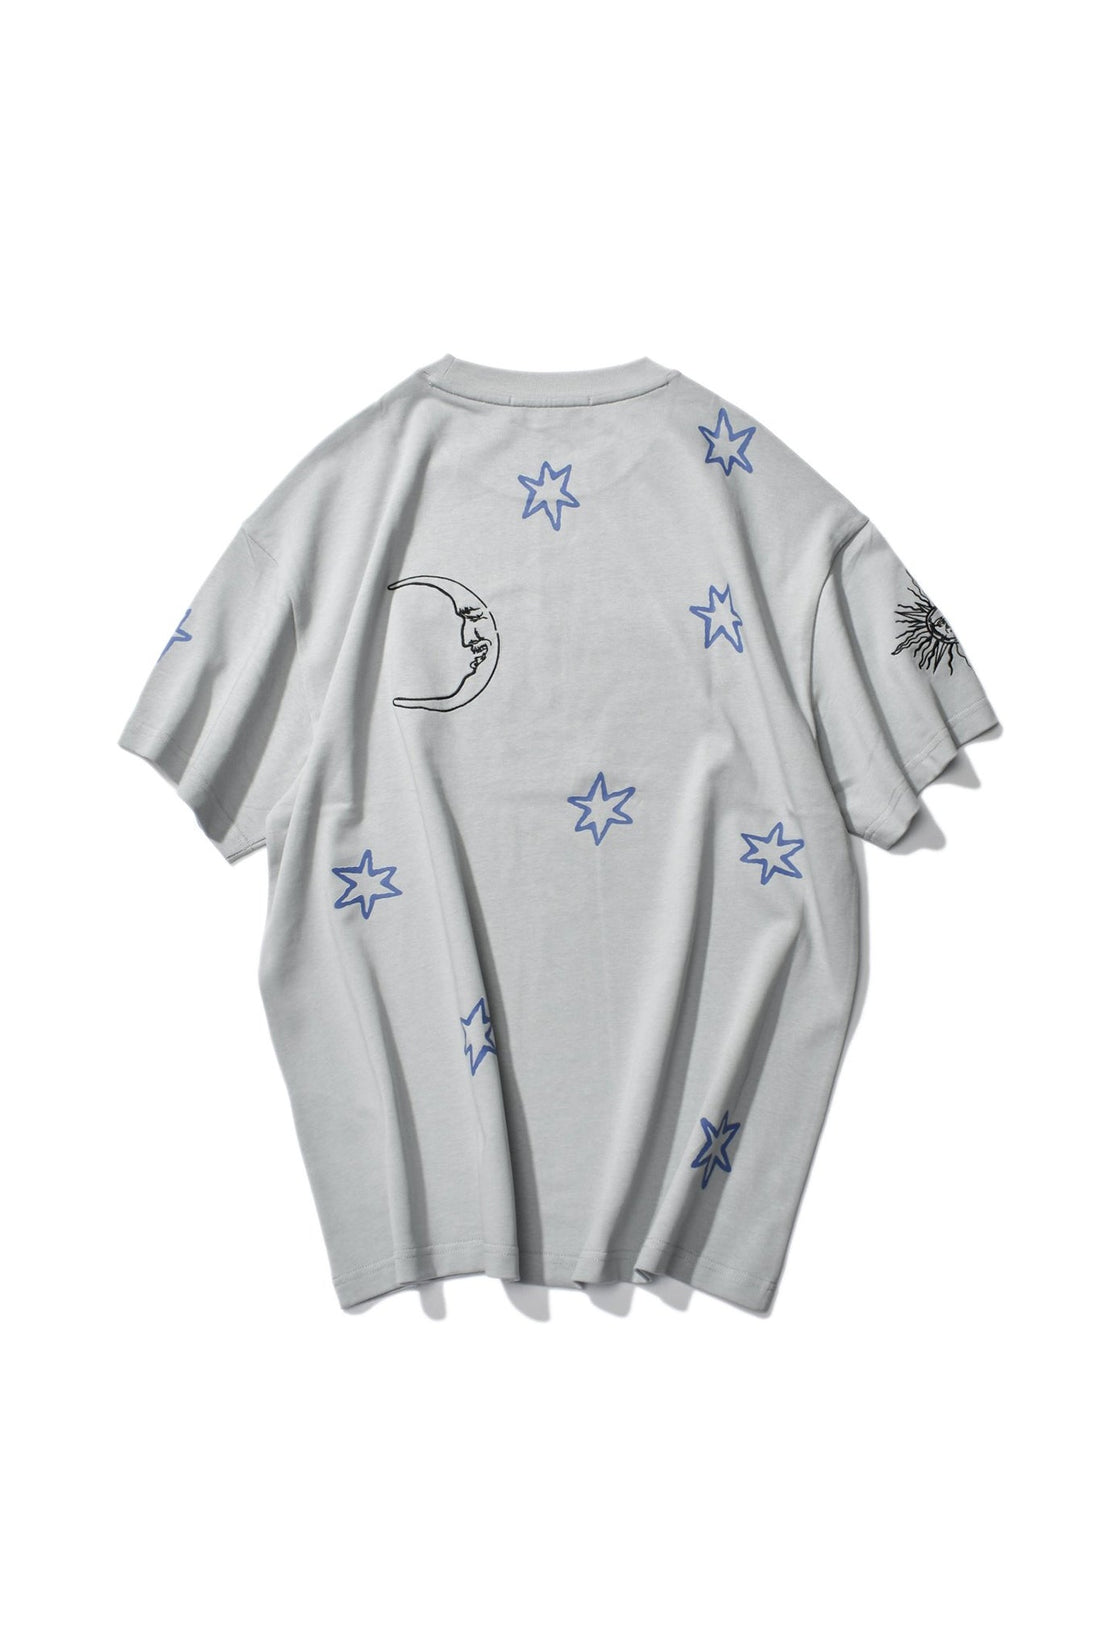 STAR MOON T-SHIRT GREY Acupuncture